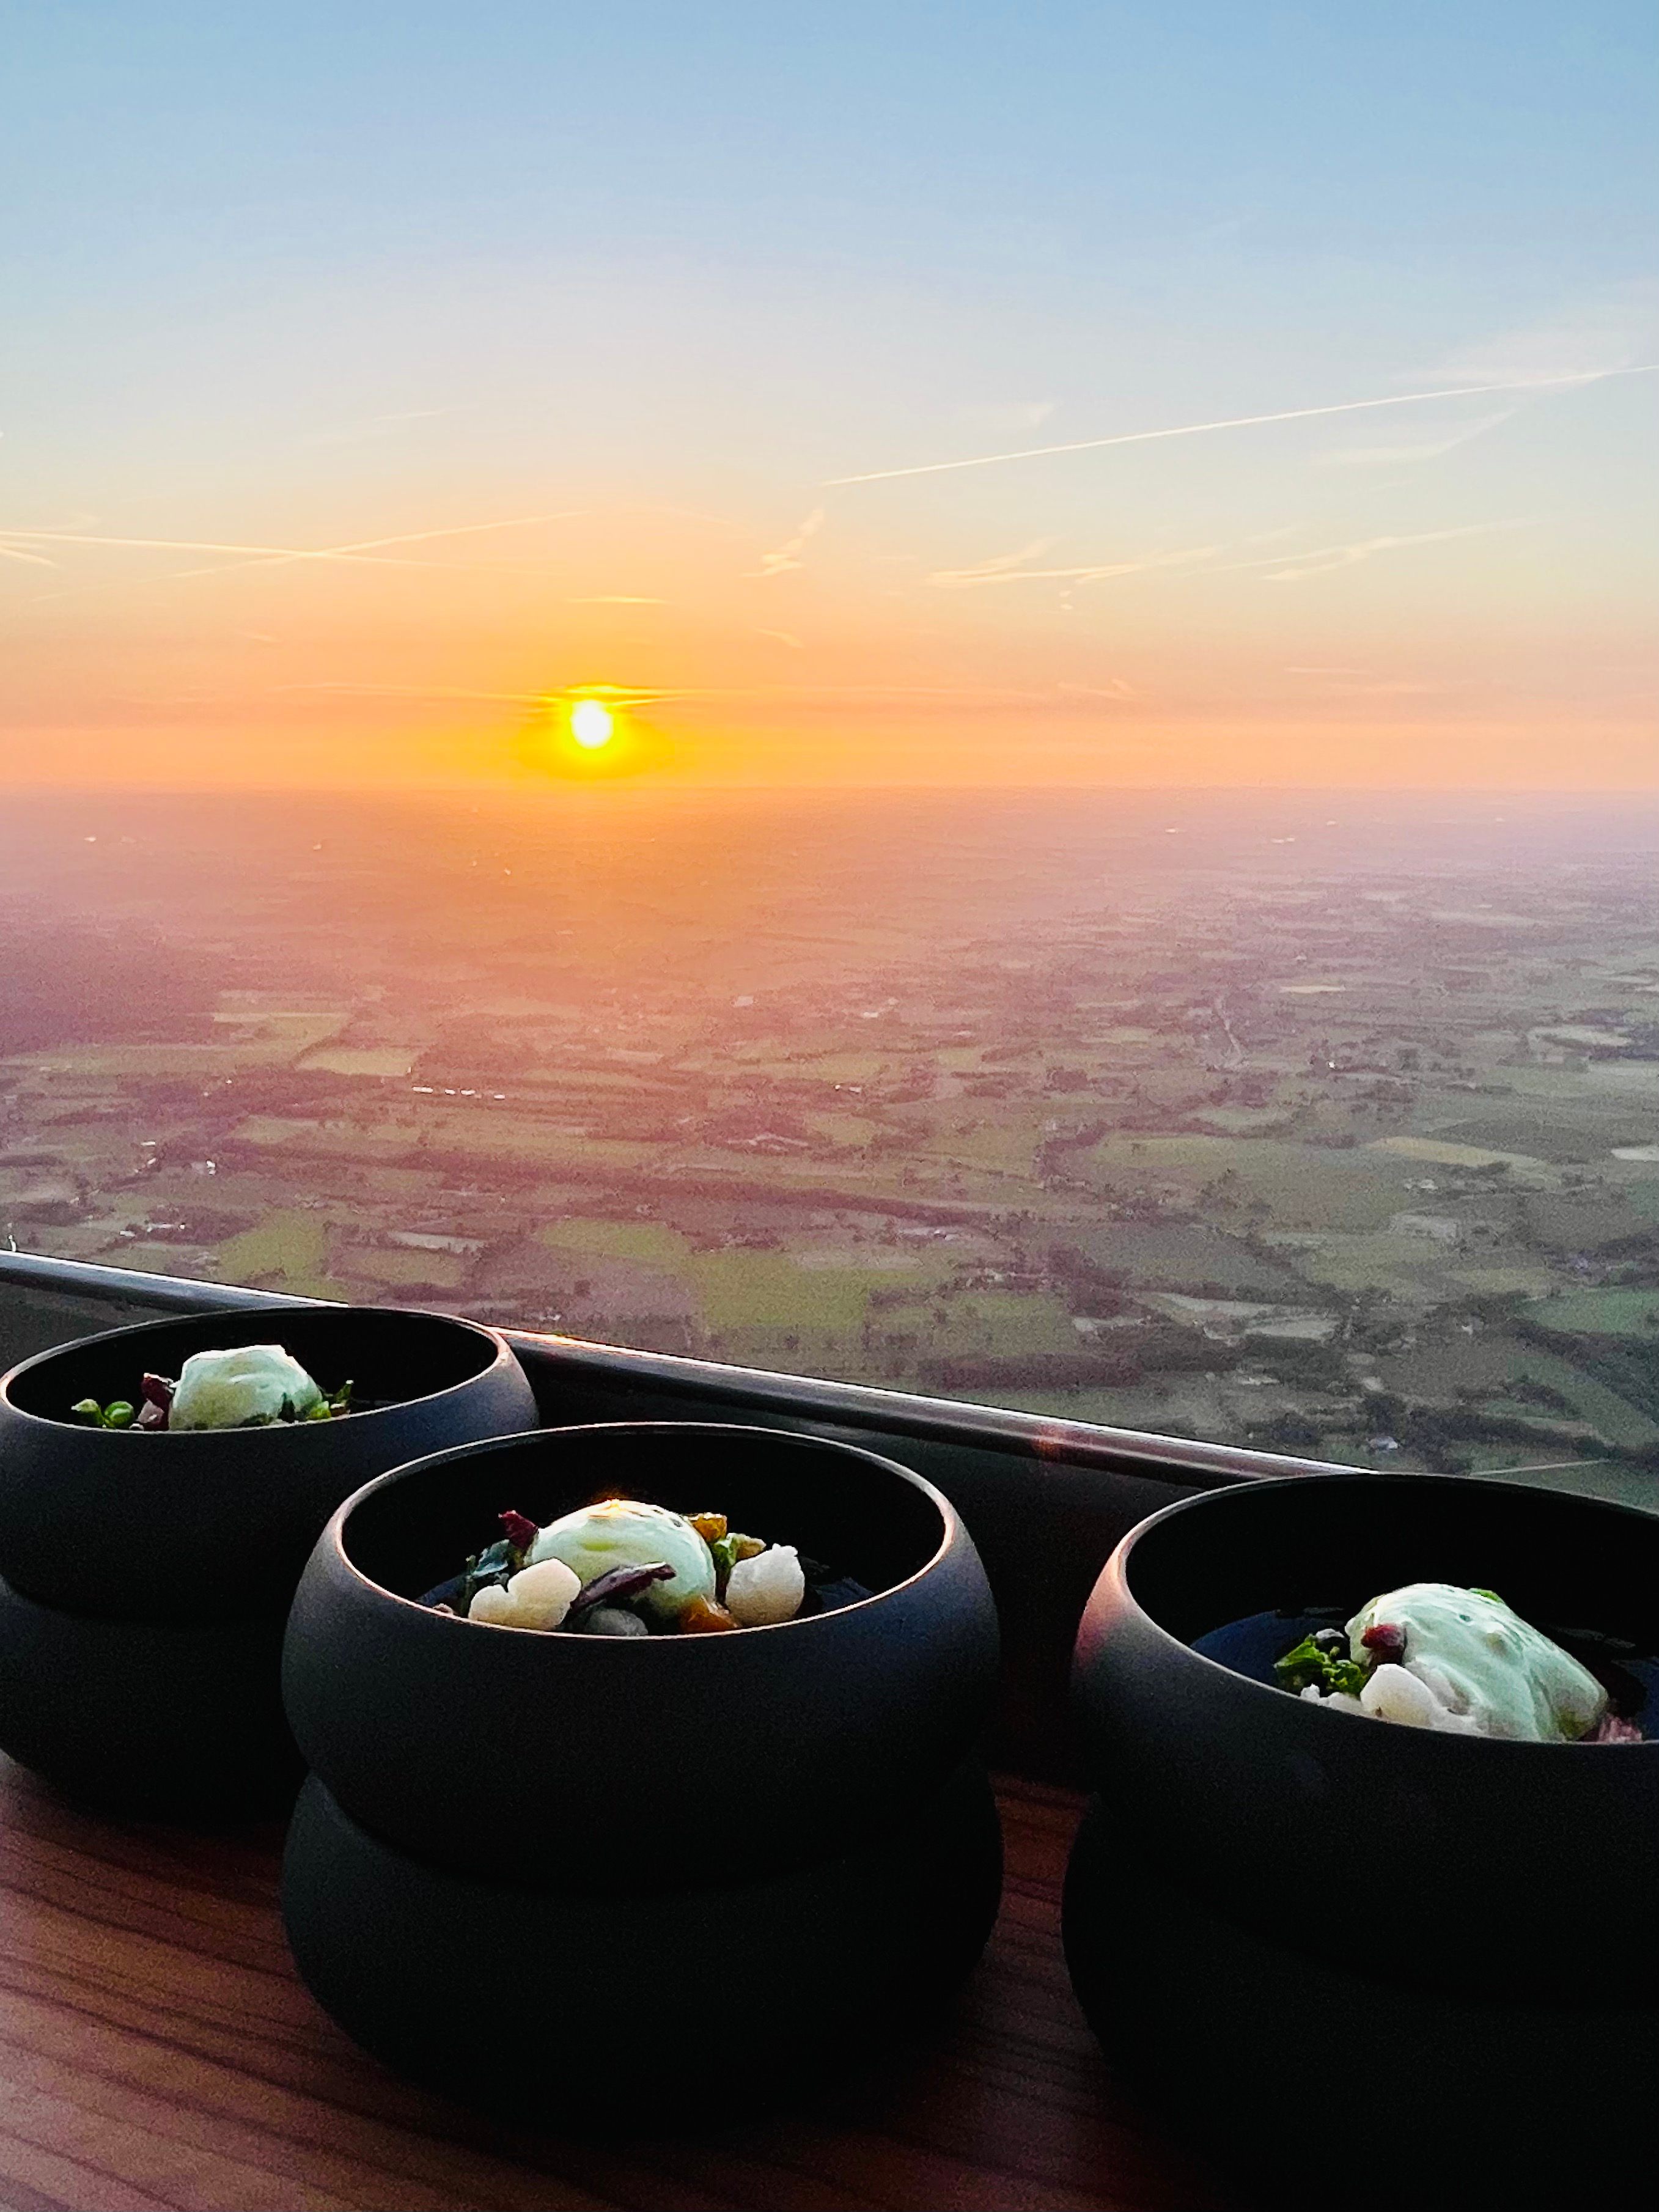 It's hard to beat the views from this restaurant in the sky.